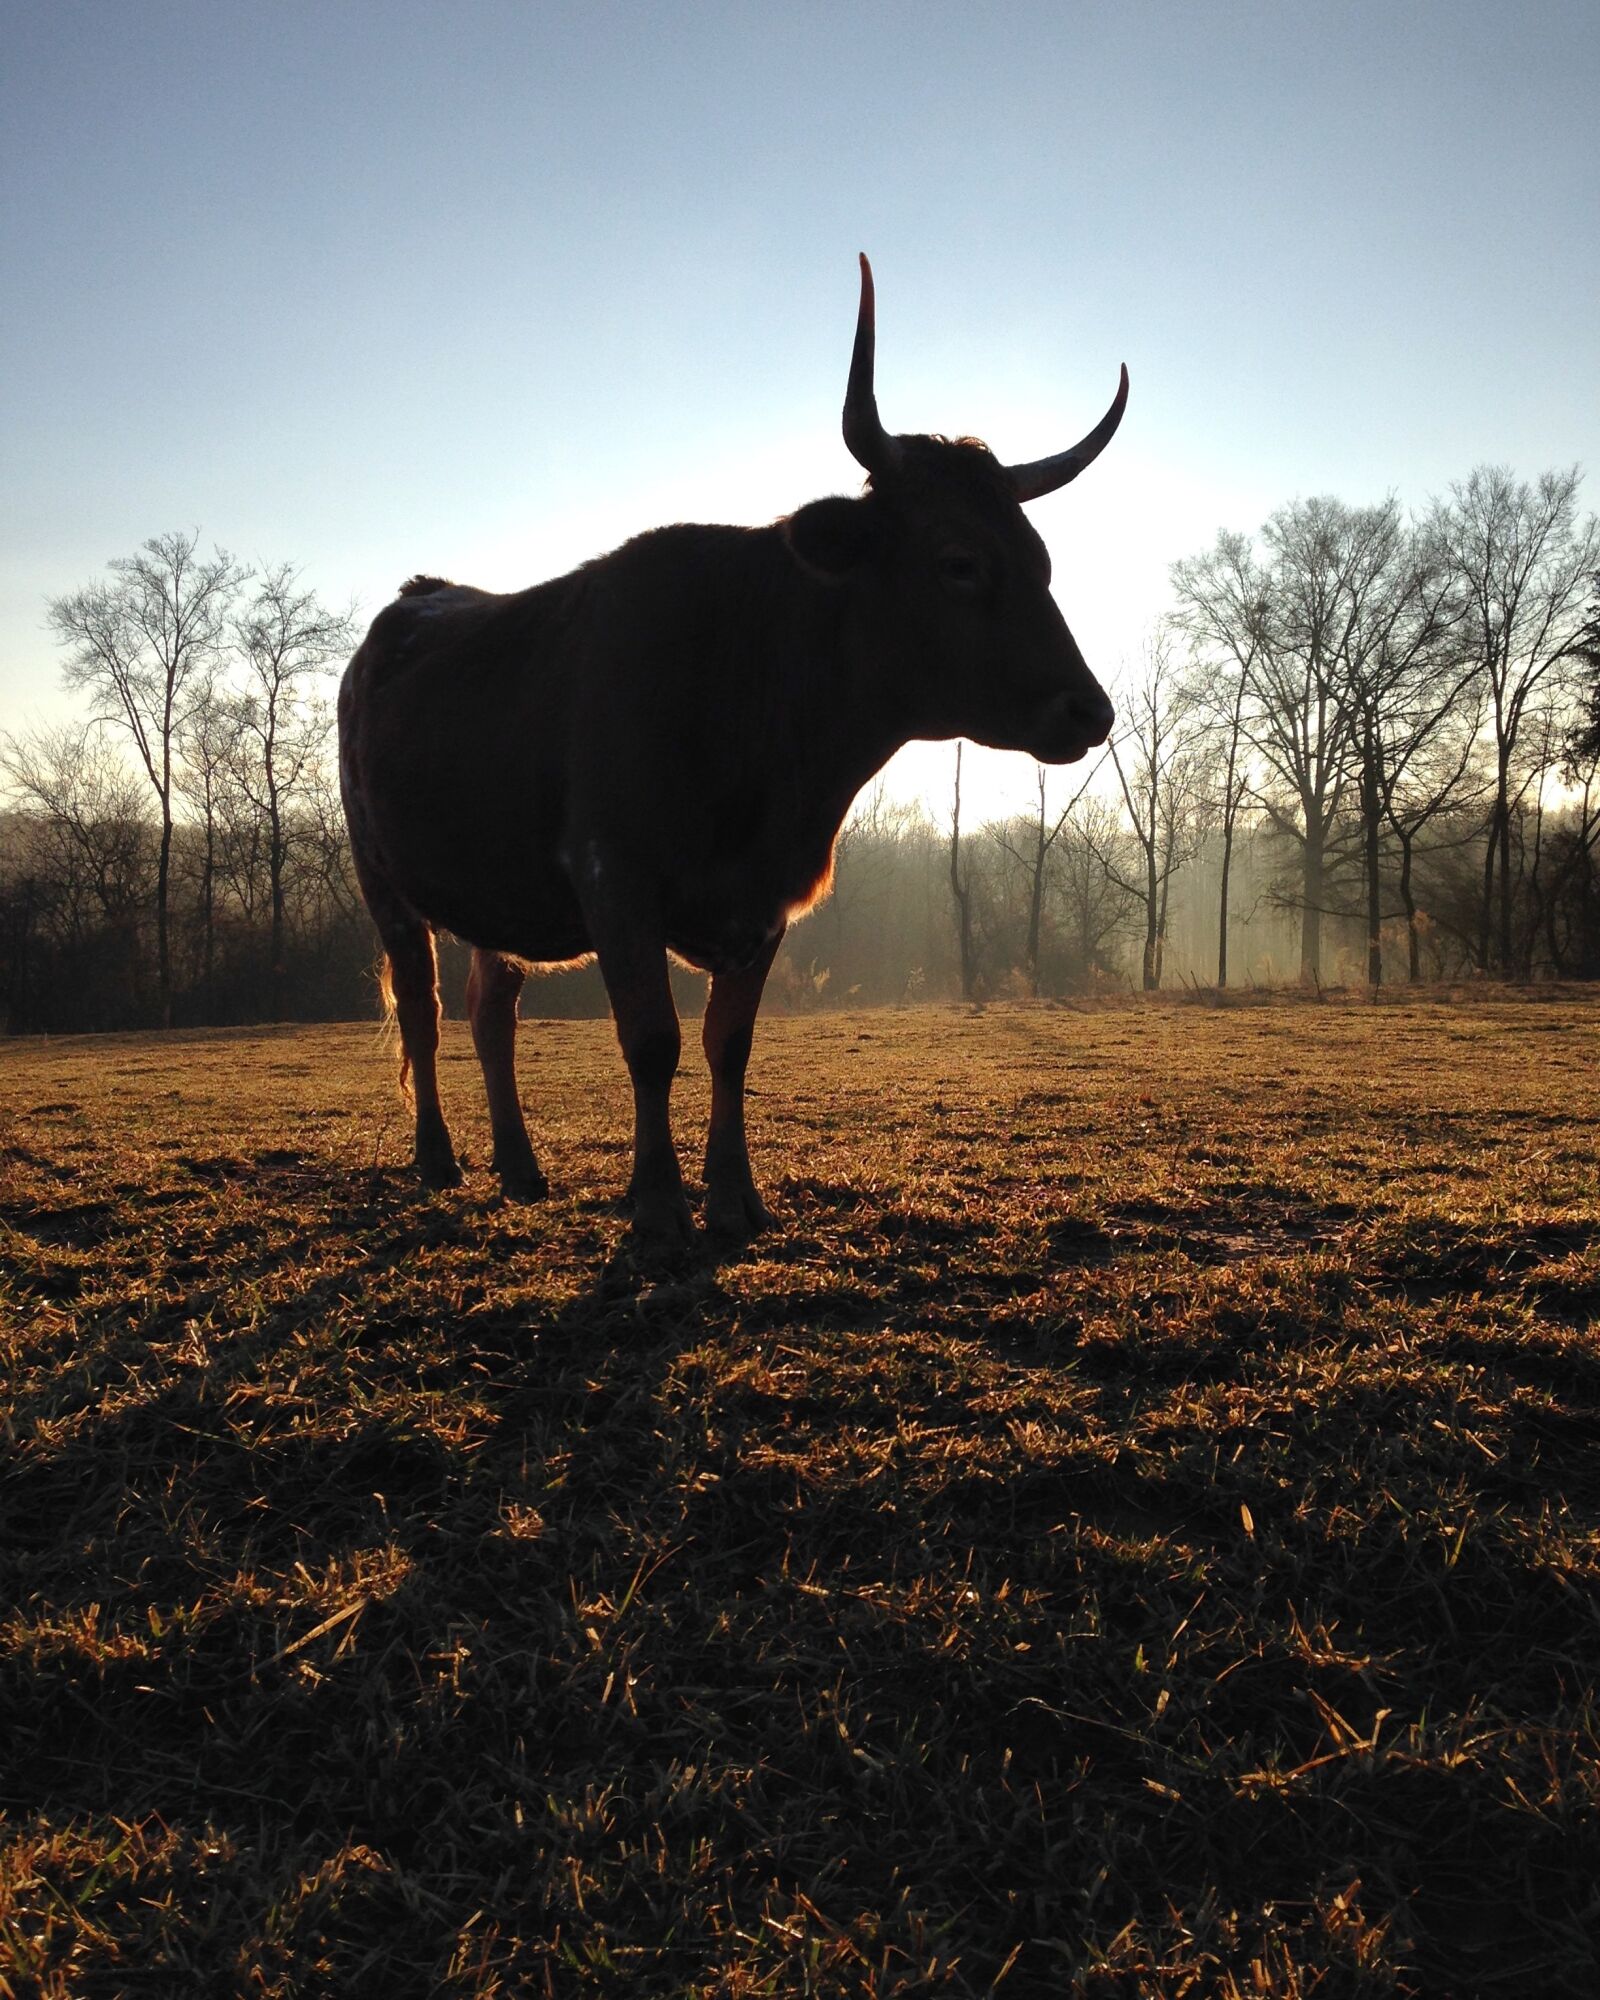 Apple iPhone 5c sample photo. Mammal, cow, cattle photography